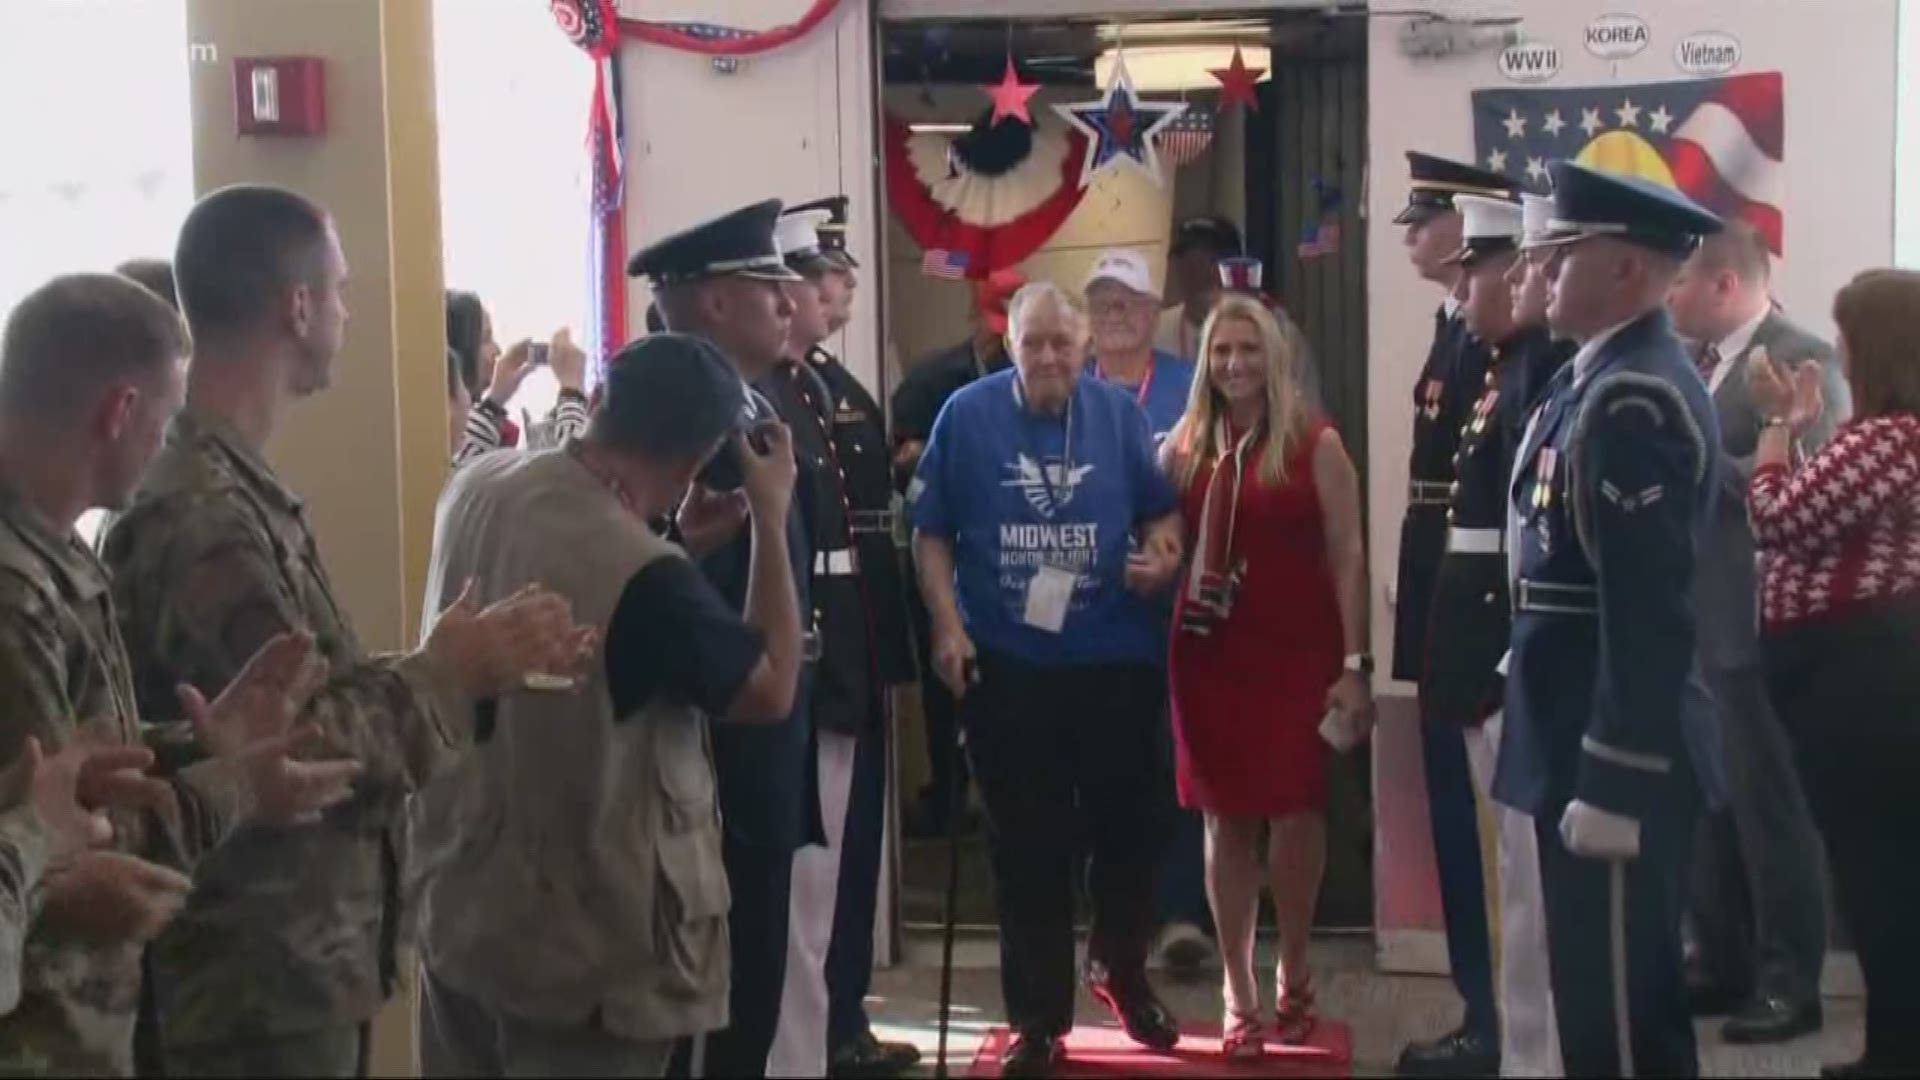 The 700th Honor Flight landed at Ronald Reagan Washington National Airport (DCA) on Tuesday carrying veterans from World War II, Korean and Vietnam Wars.